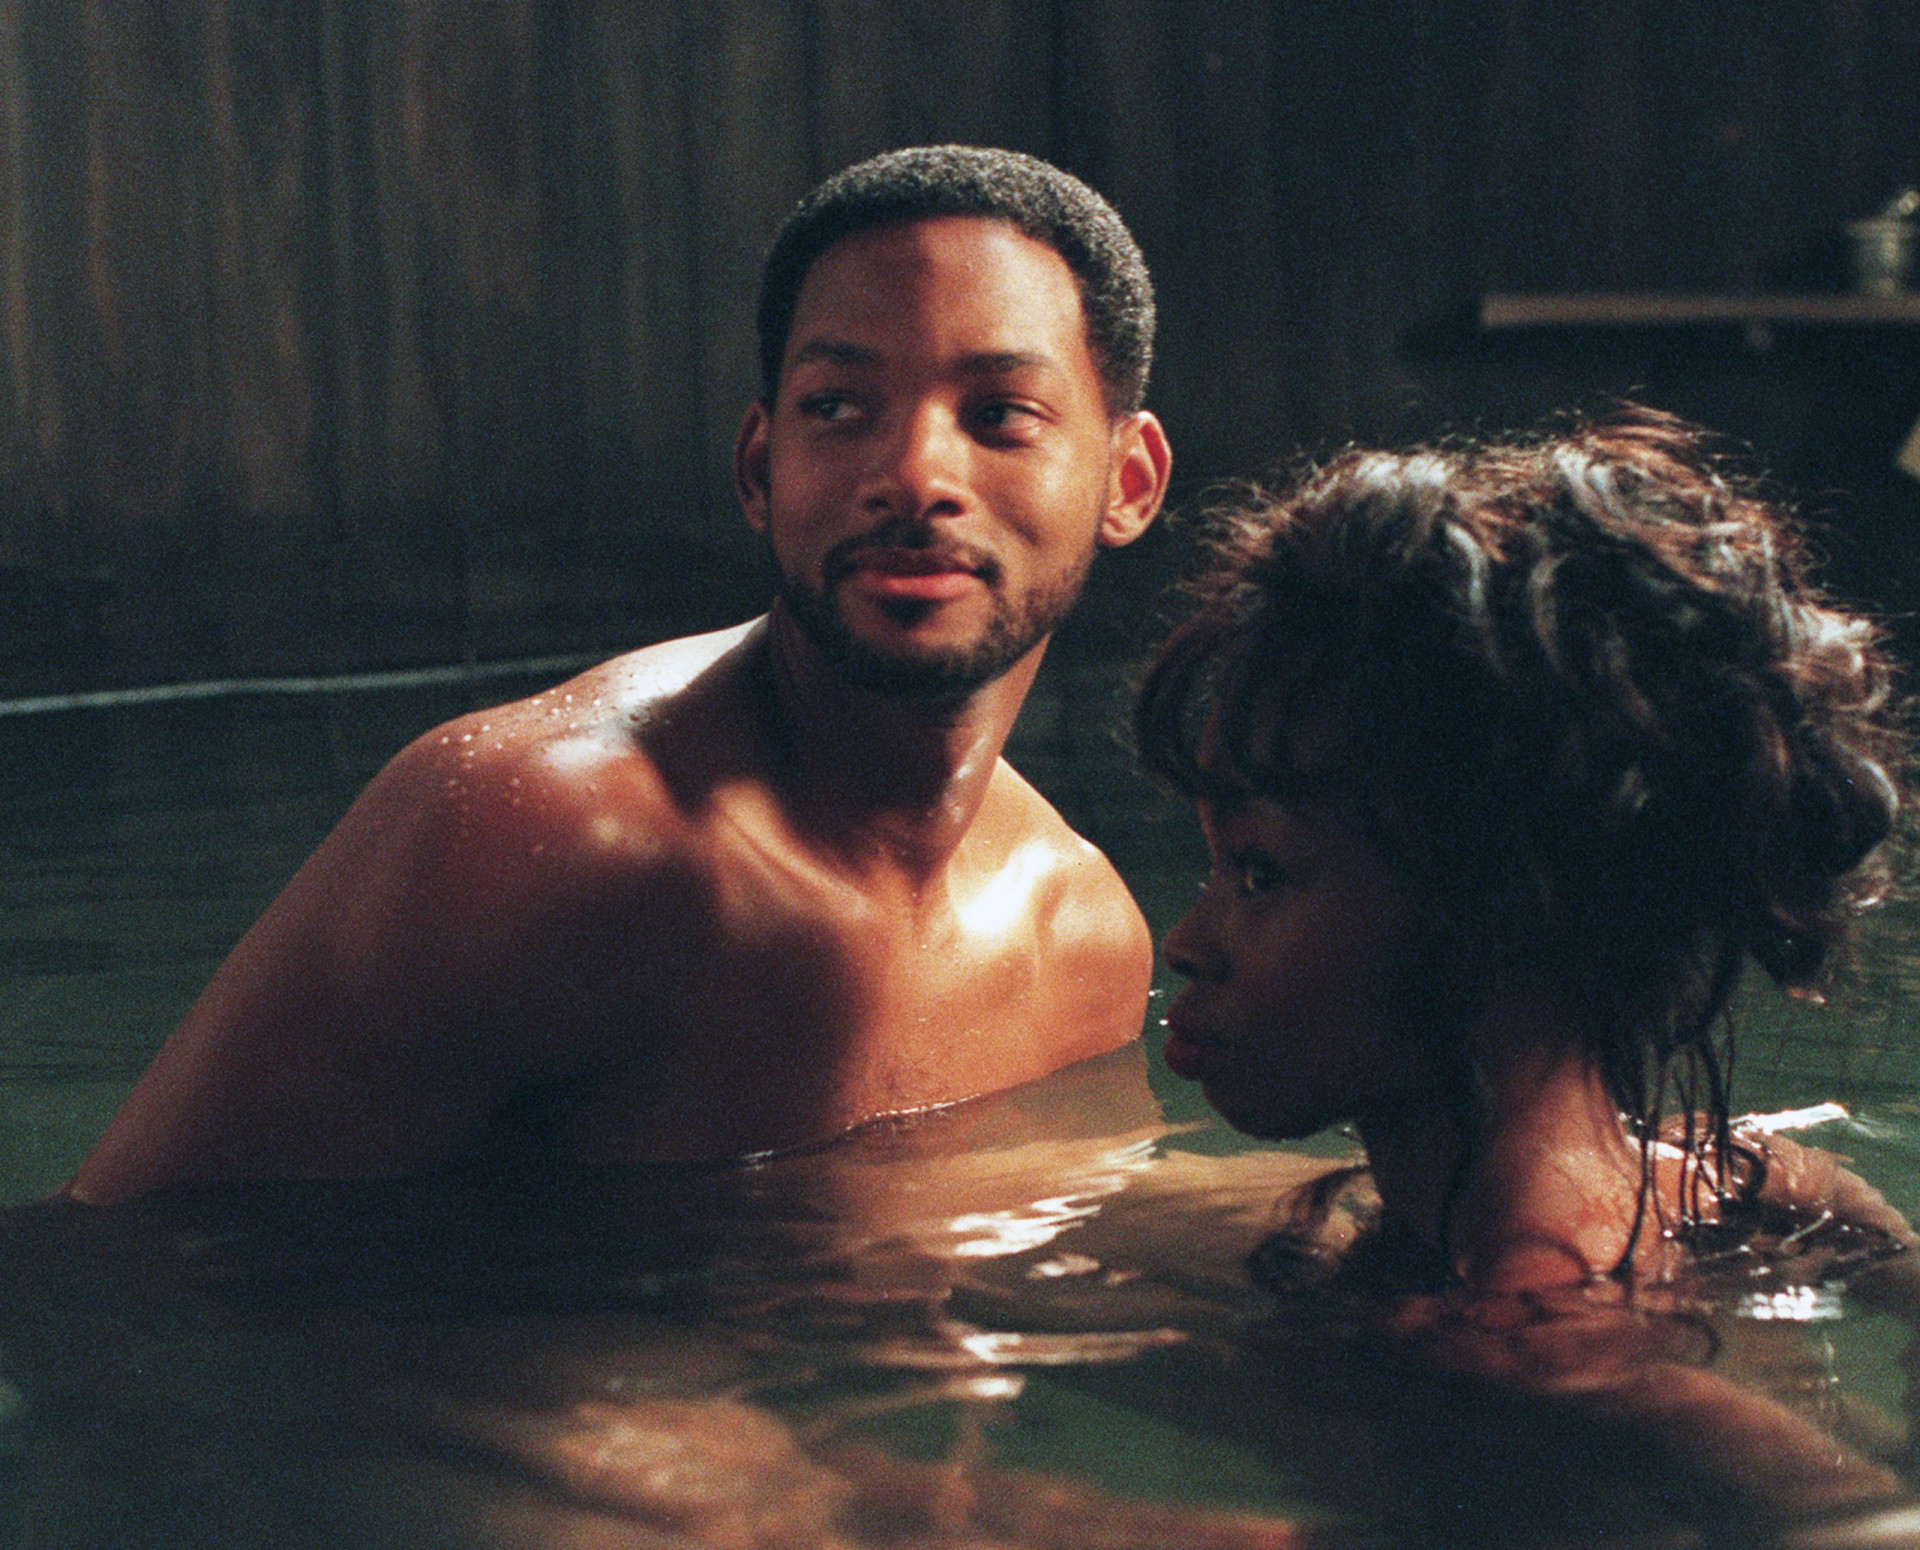 <p>Captain James T. West (Will Smith) enjoys a little hot tub rest and relaxation with a friend between running down the bad guys in this wacky steampunk Western.</p><p>You may also like:<a href="https://www.starsinsider.com/n/249284?utm_source=msn.com&utm_medium=display&utm_campaign=referral_description&utm_content=546036en-en"> Micronations around the world that you had no idea existed</a></p>